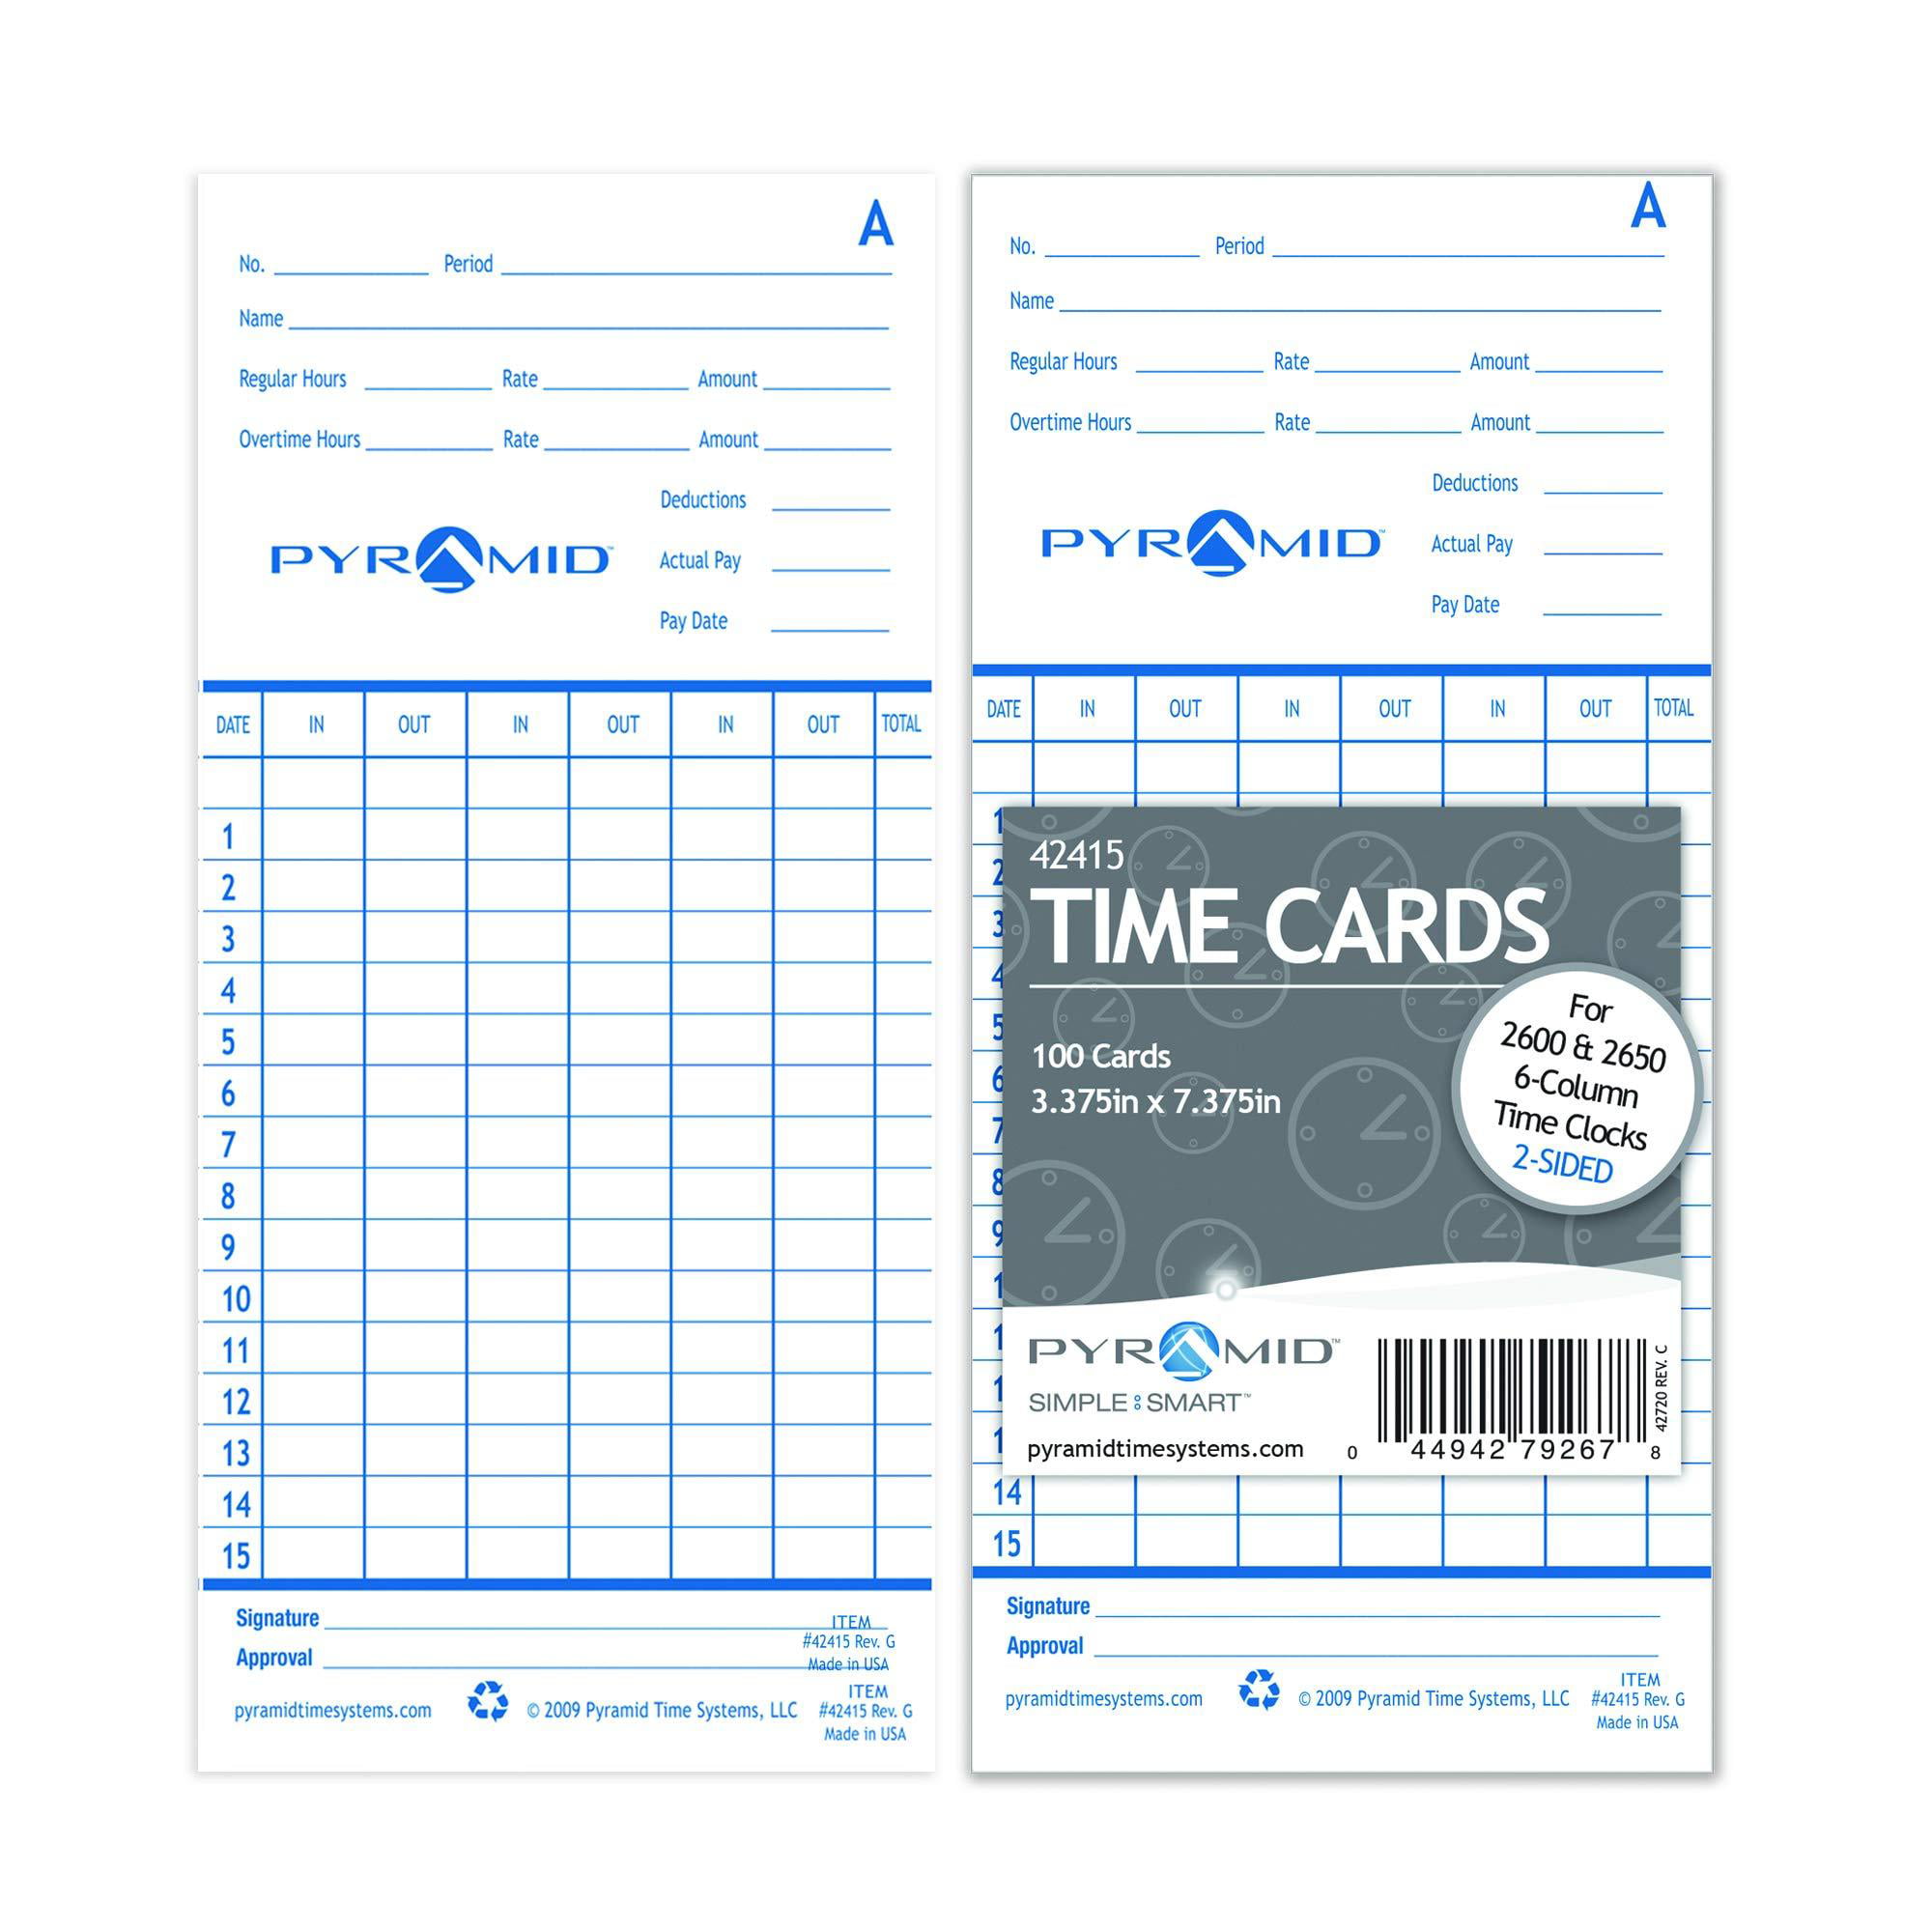 000 Count Time Cards for 2600 and 2650 Time Clocks-Spanish Pyramid 1 